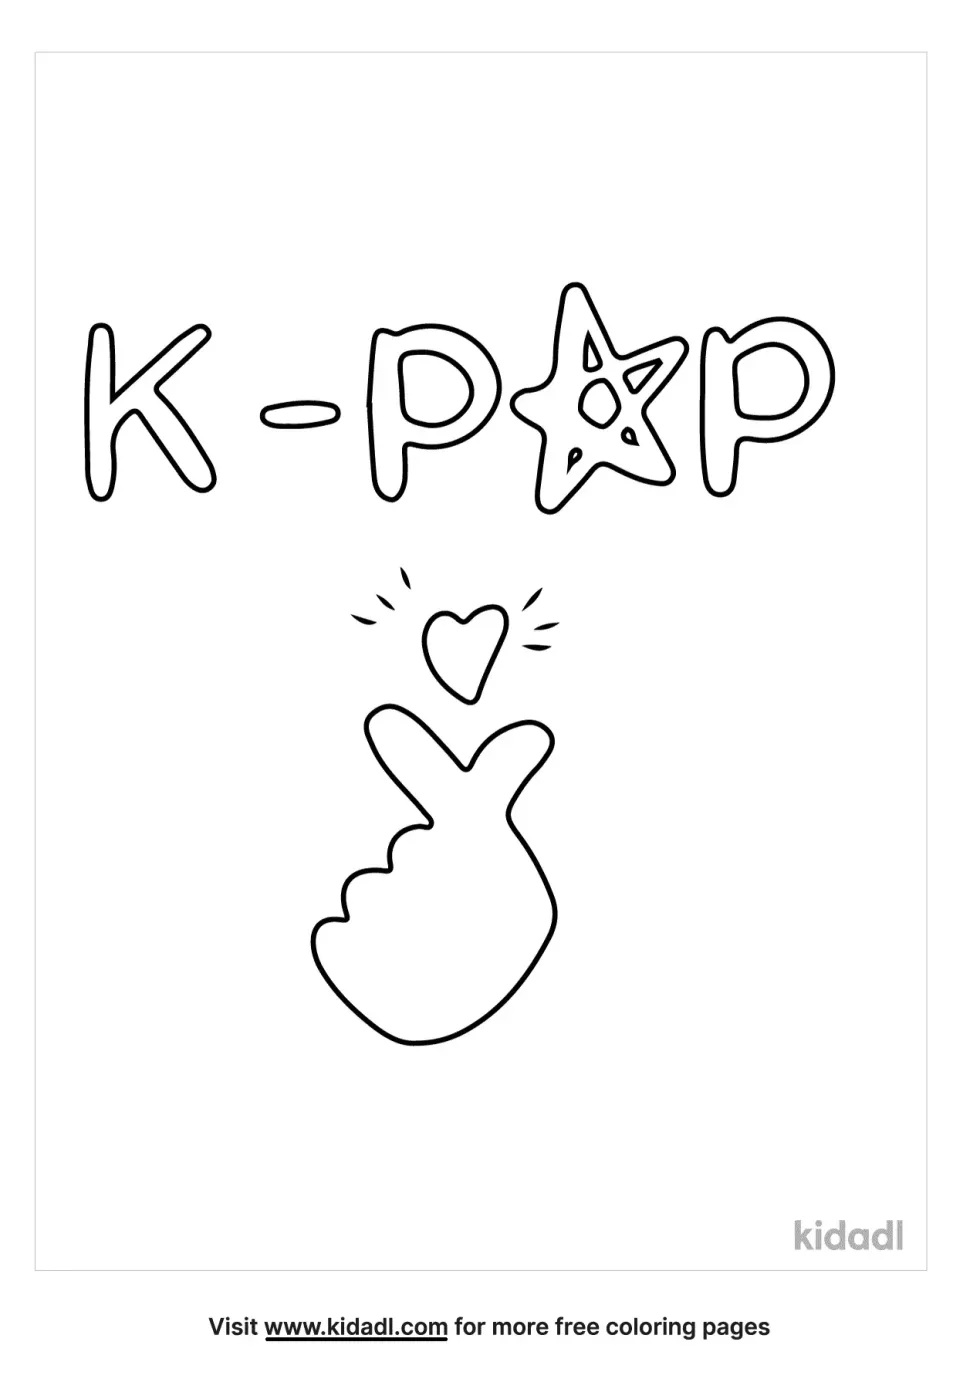 Kpop Coloring Page